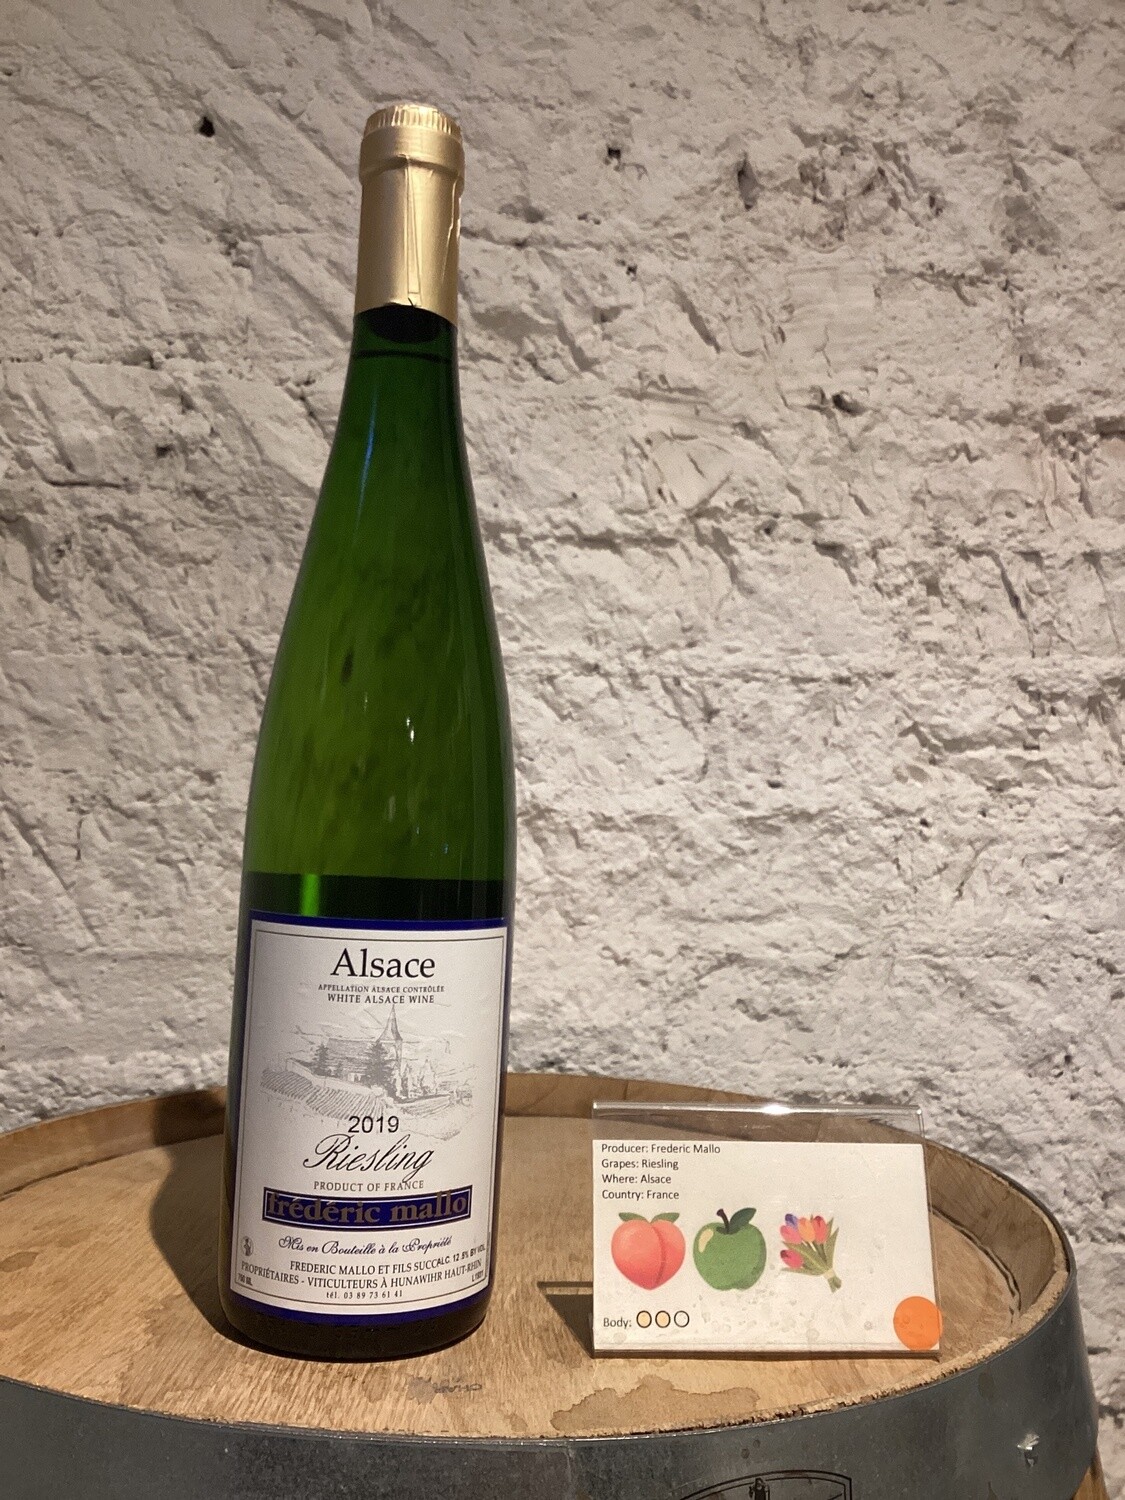 Frederic Mallo, Riesling, Alsace, France 2019, Size: 750ml